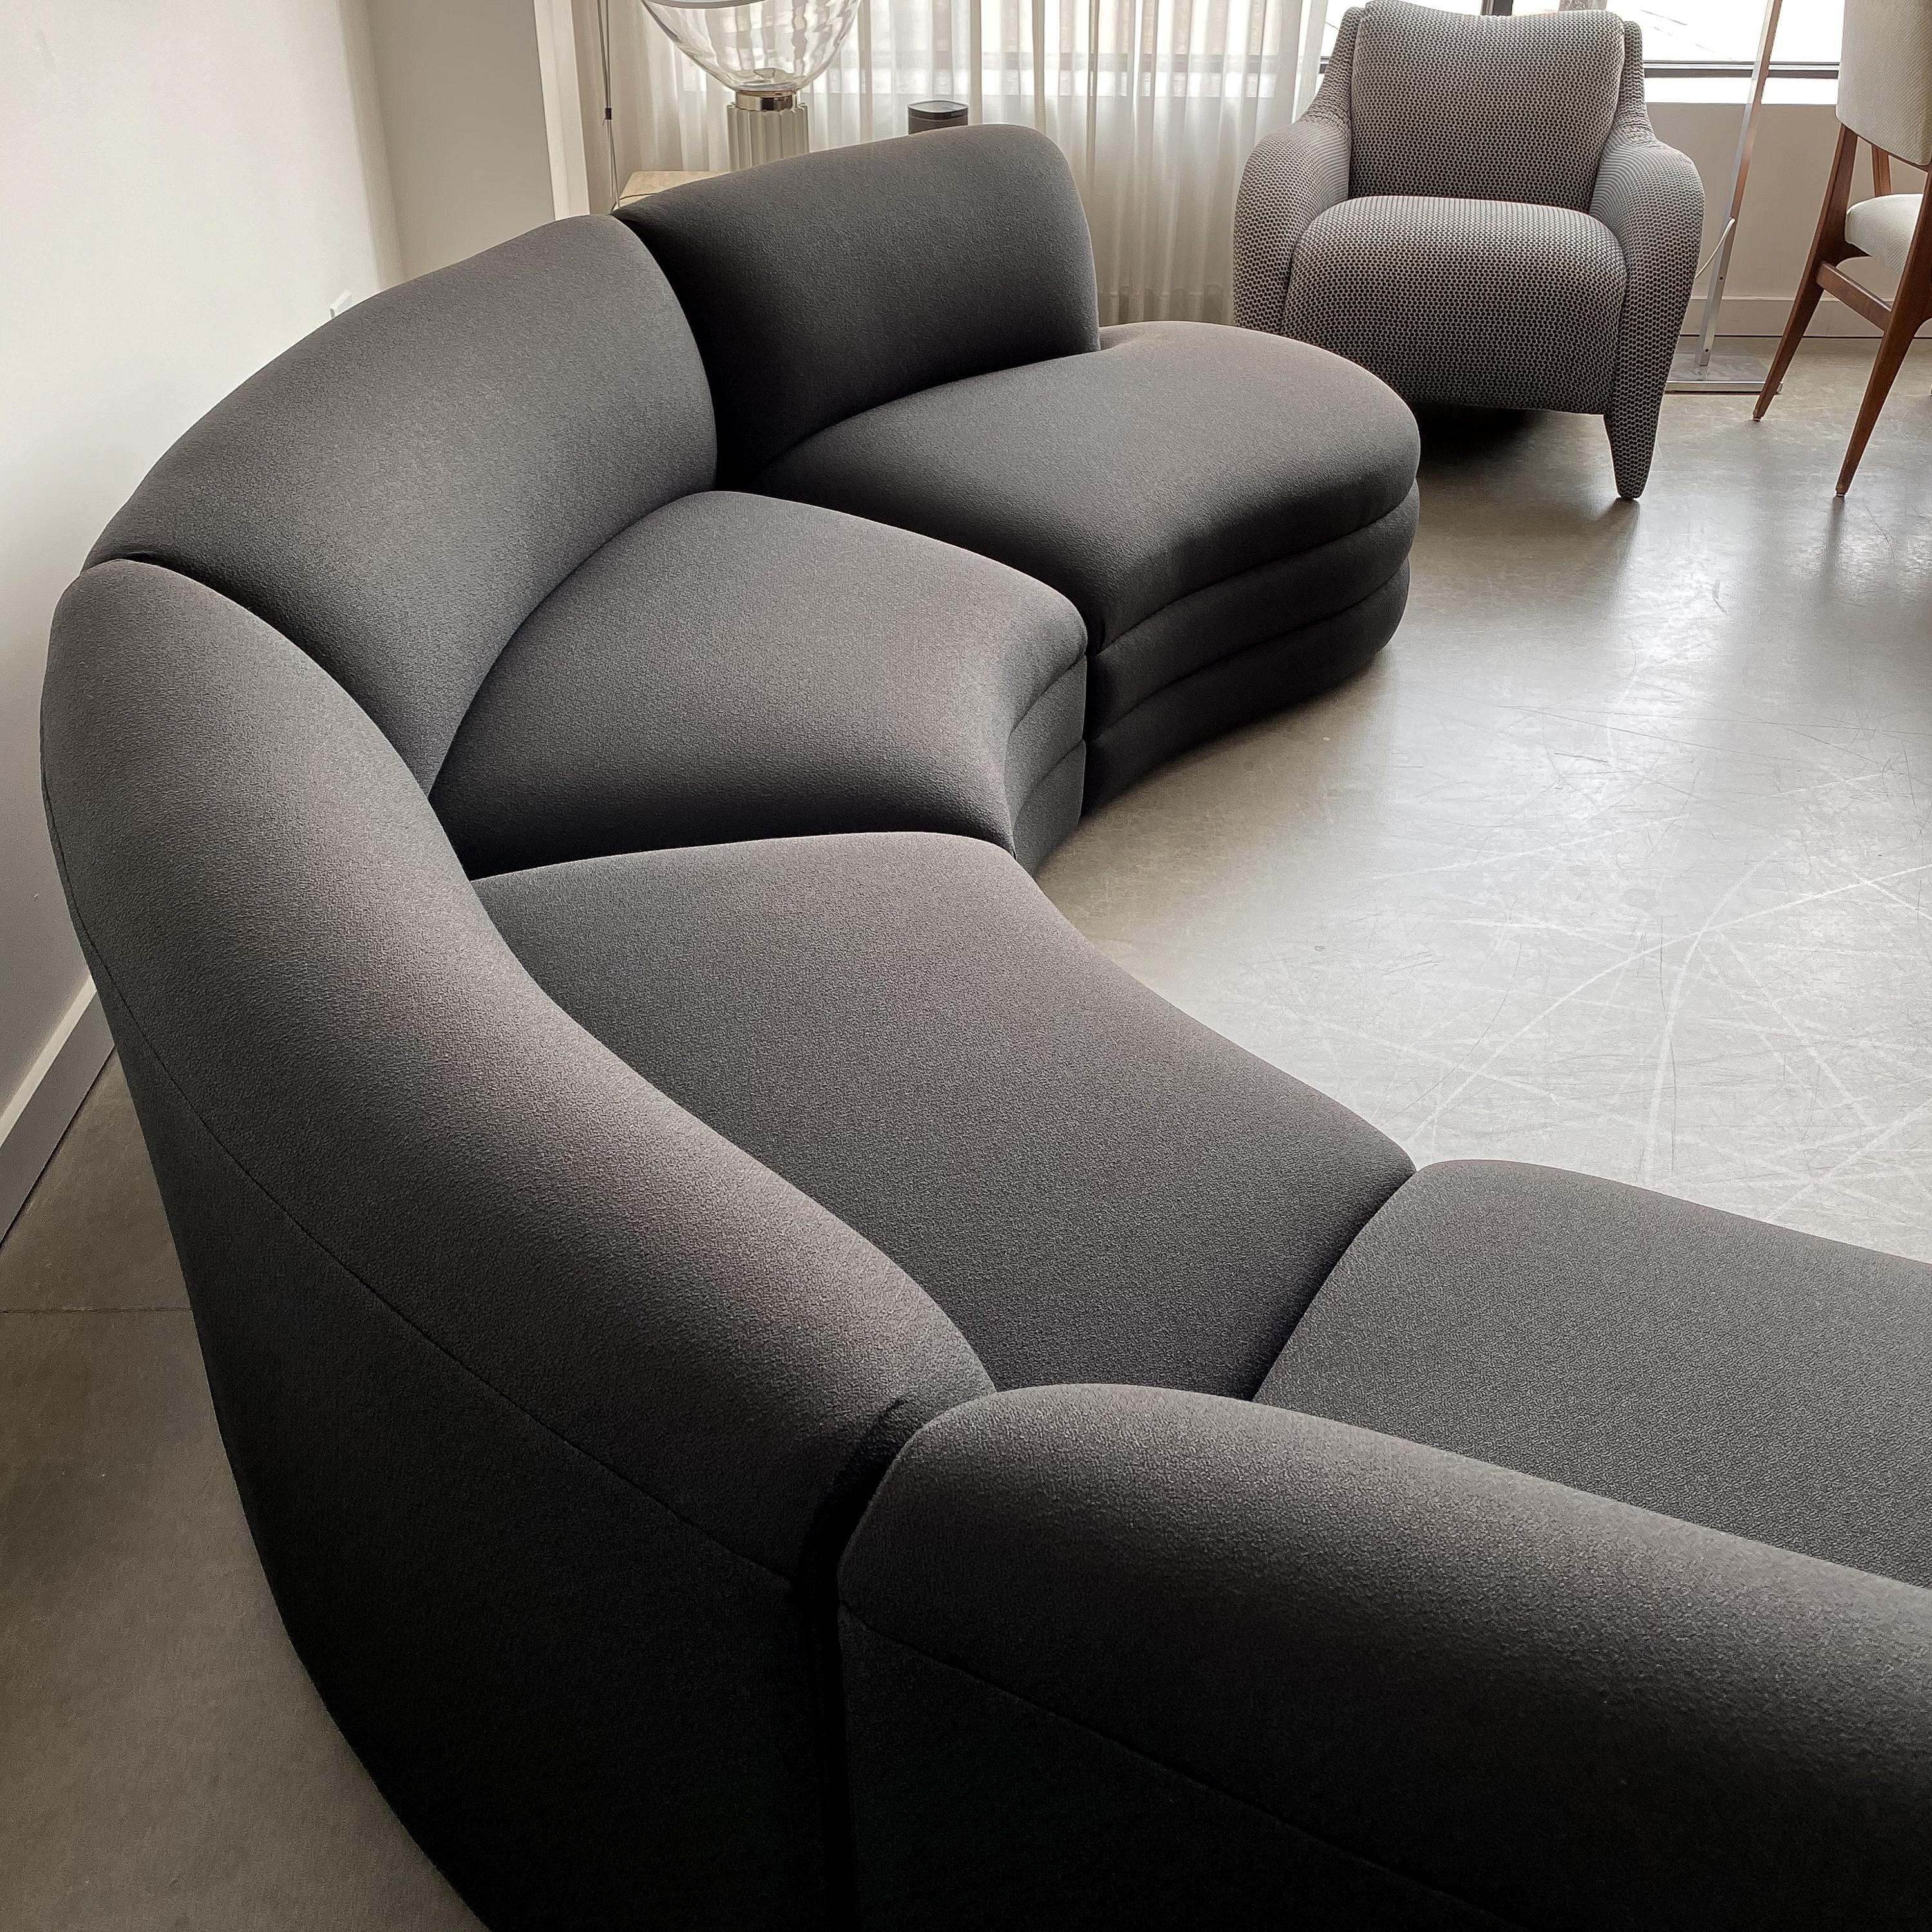 Four Piece Curved Sectional Sofa Attributed to Vladimir Kagan 8